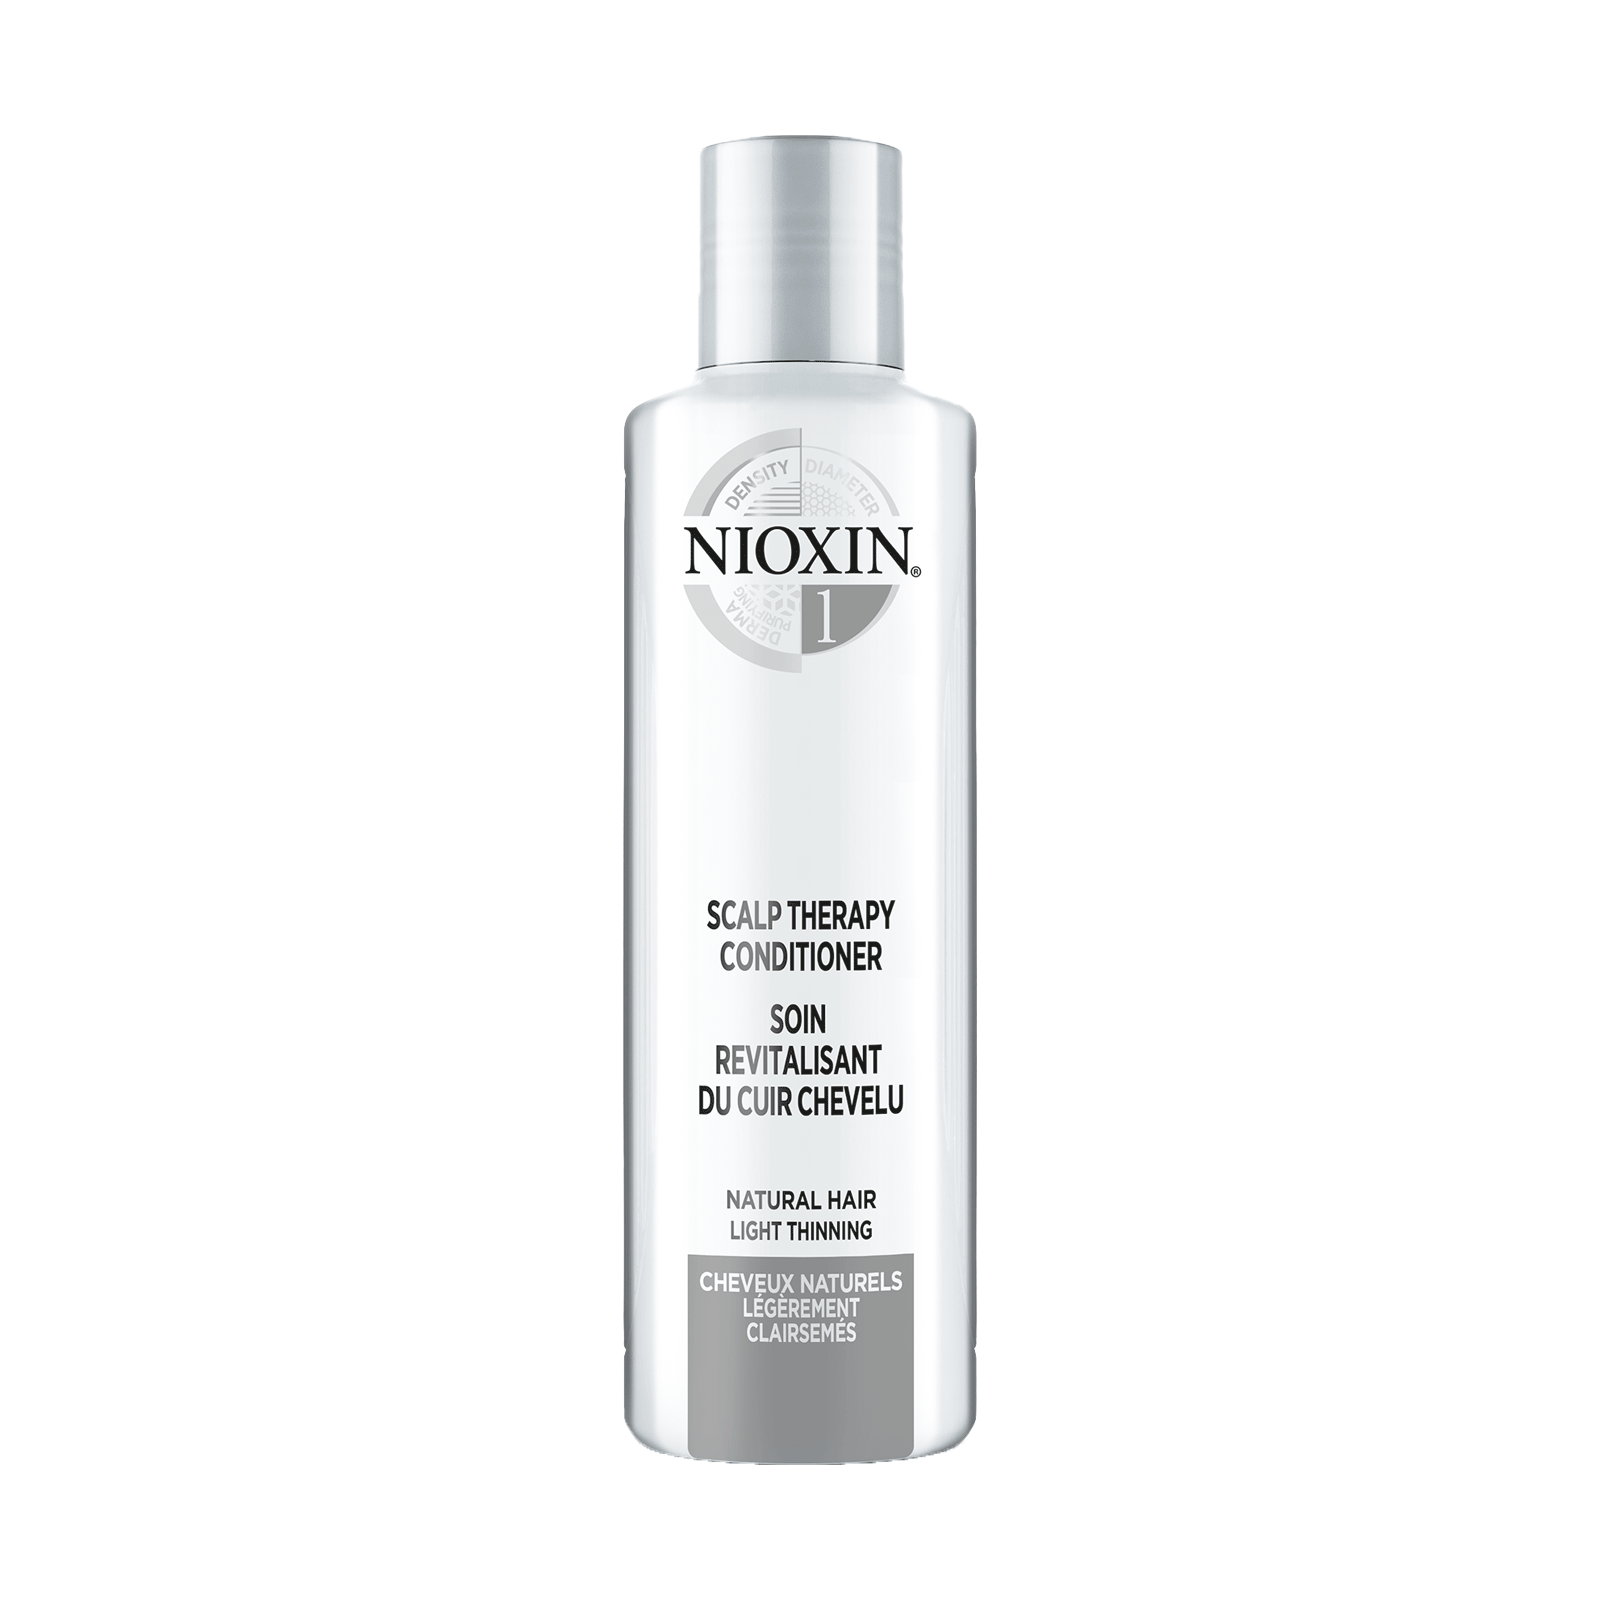 Nioxin Scalp Therapy Conditioner System 1 300ml - Natural Hair.  Light Thinning.